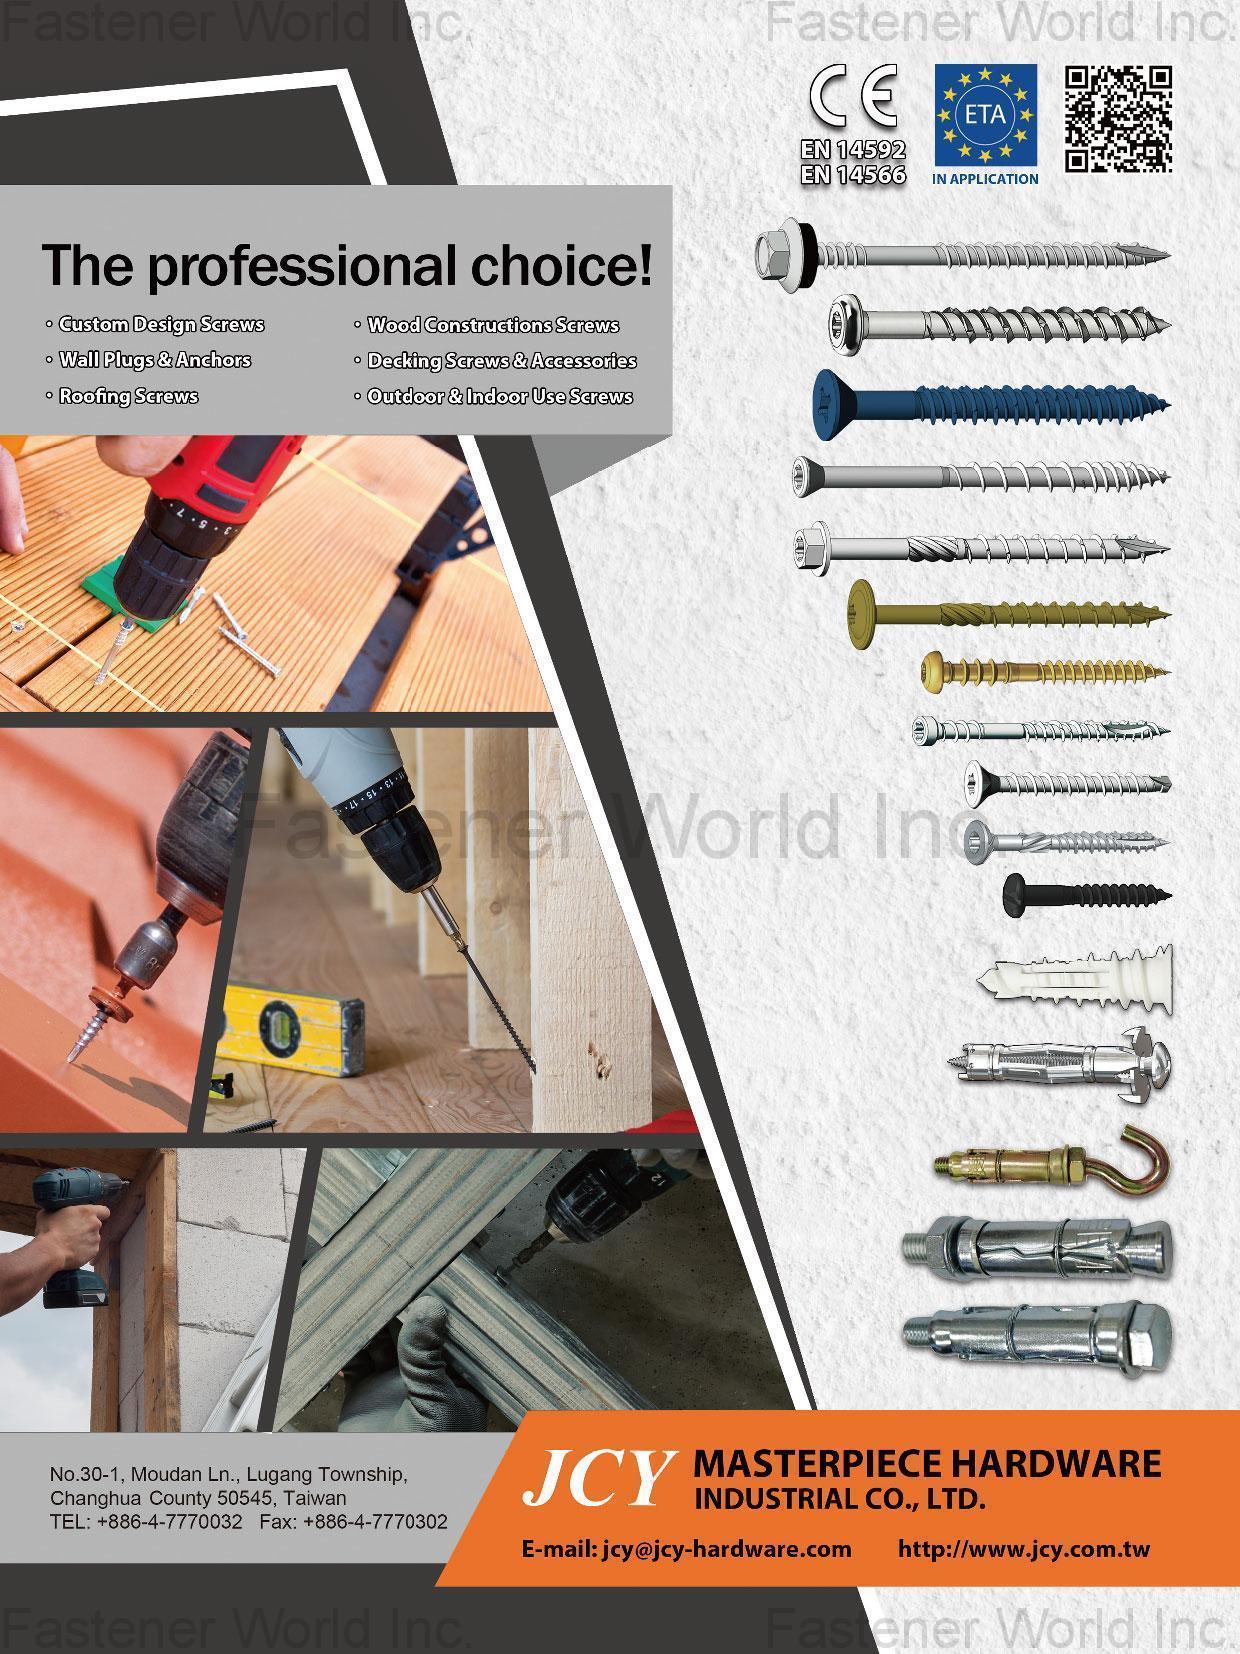 MASTERPIECE HARDWARE INDUSTRIAL CO., LTD. , Custom Design Screws, Wall Plugs & Anchors, Roofing Screws, Wood Constructions Screws, Decking Screws & Accessories, Outdoor & Indoor Use Screws , Customized Special Screws / Bolts